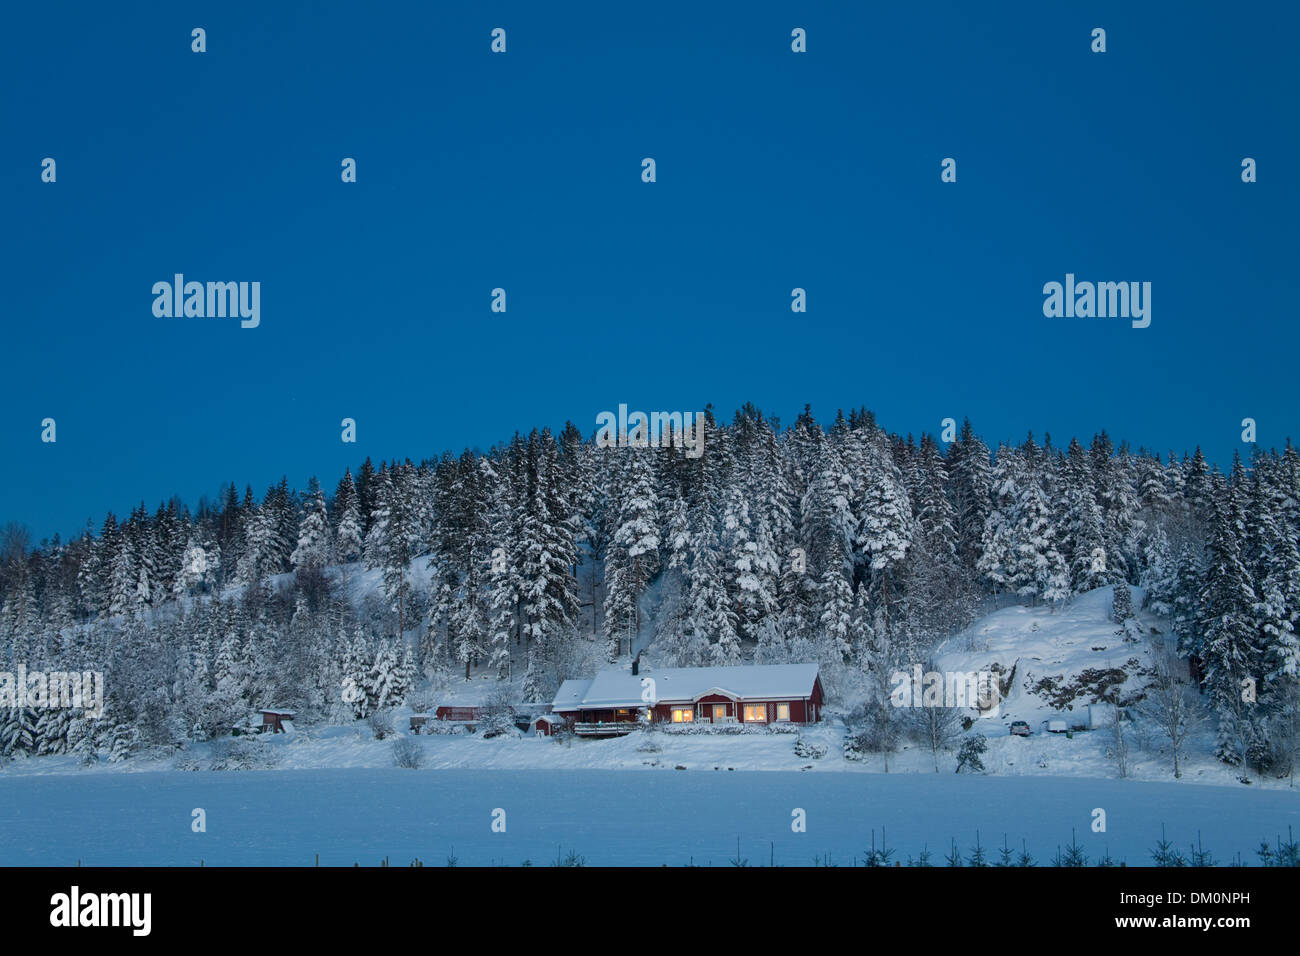 Cold Blue Evening light over snowy landscape with illuminated house Stock Photo